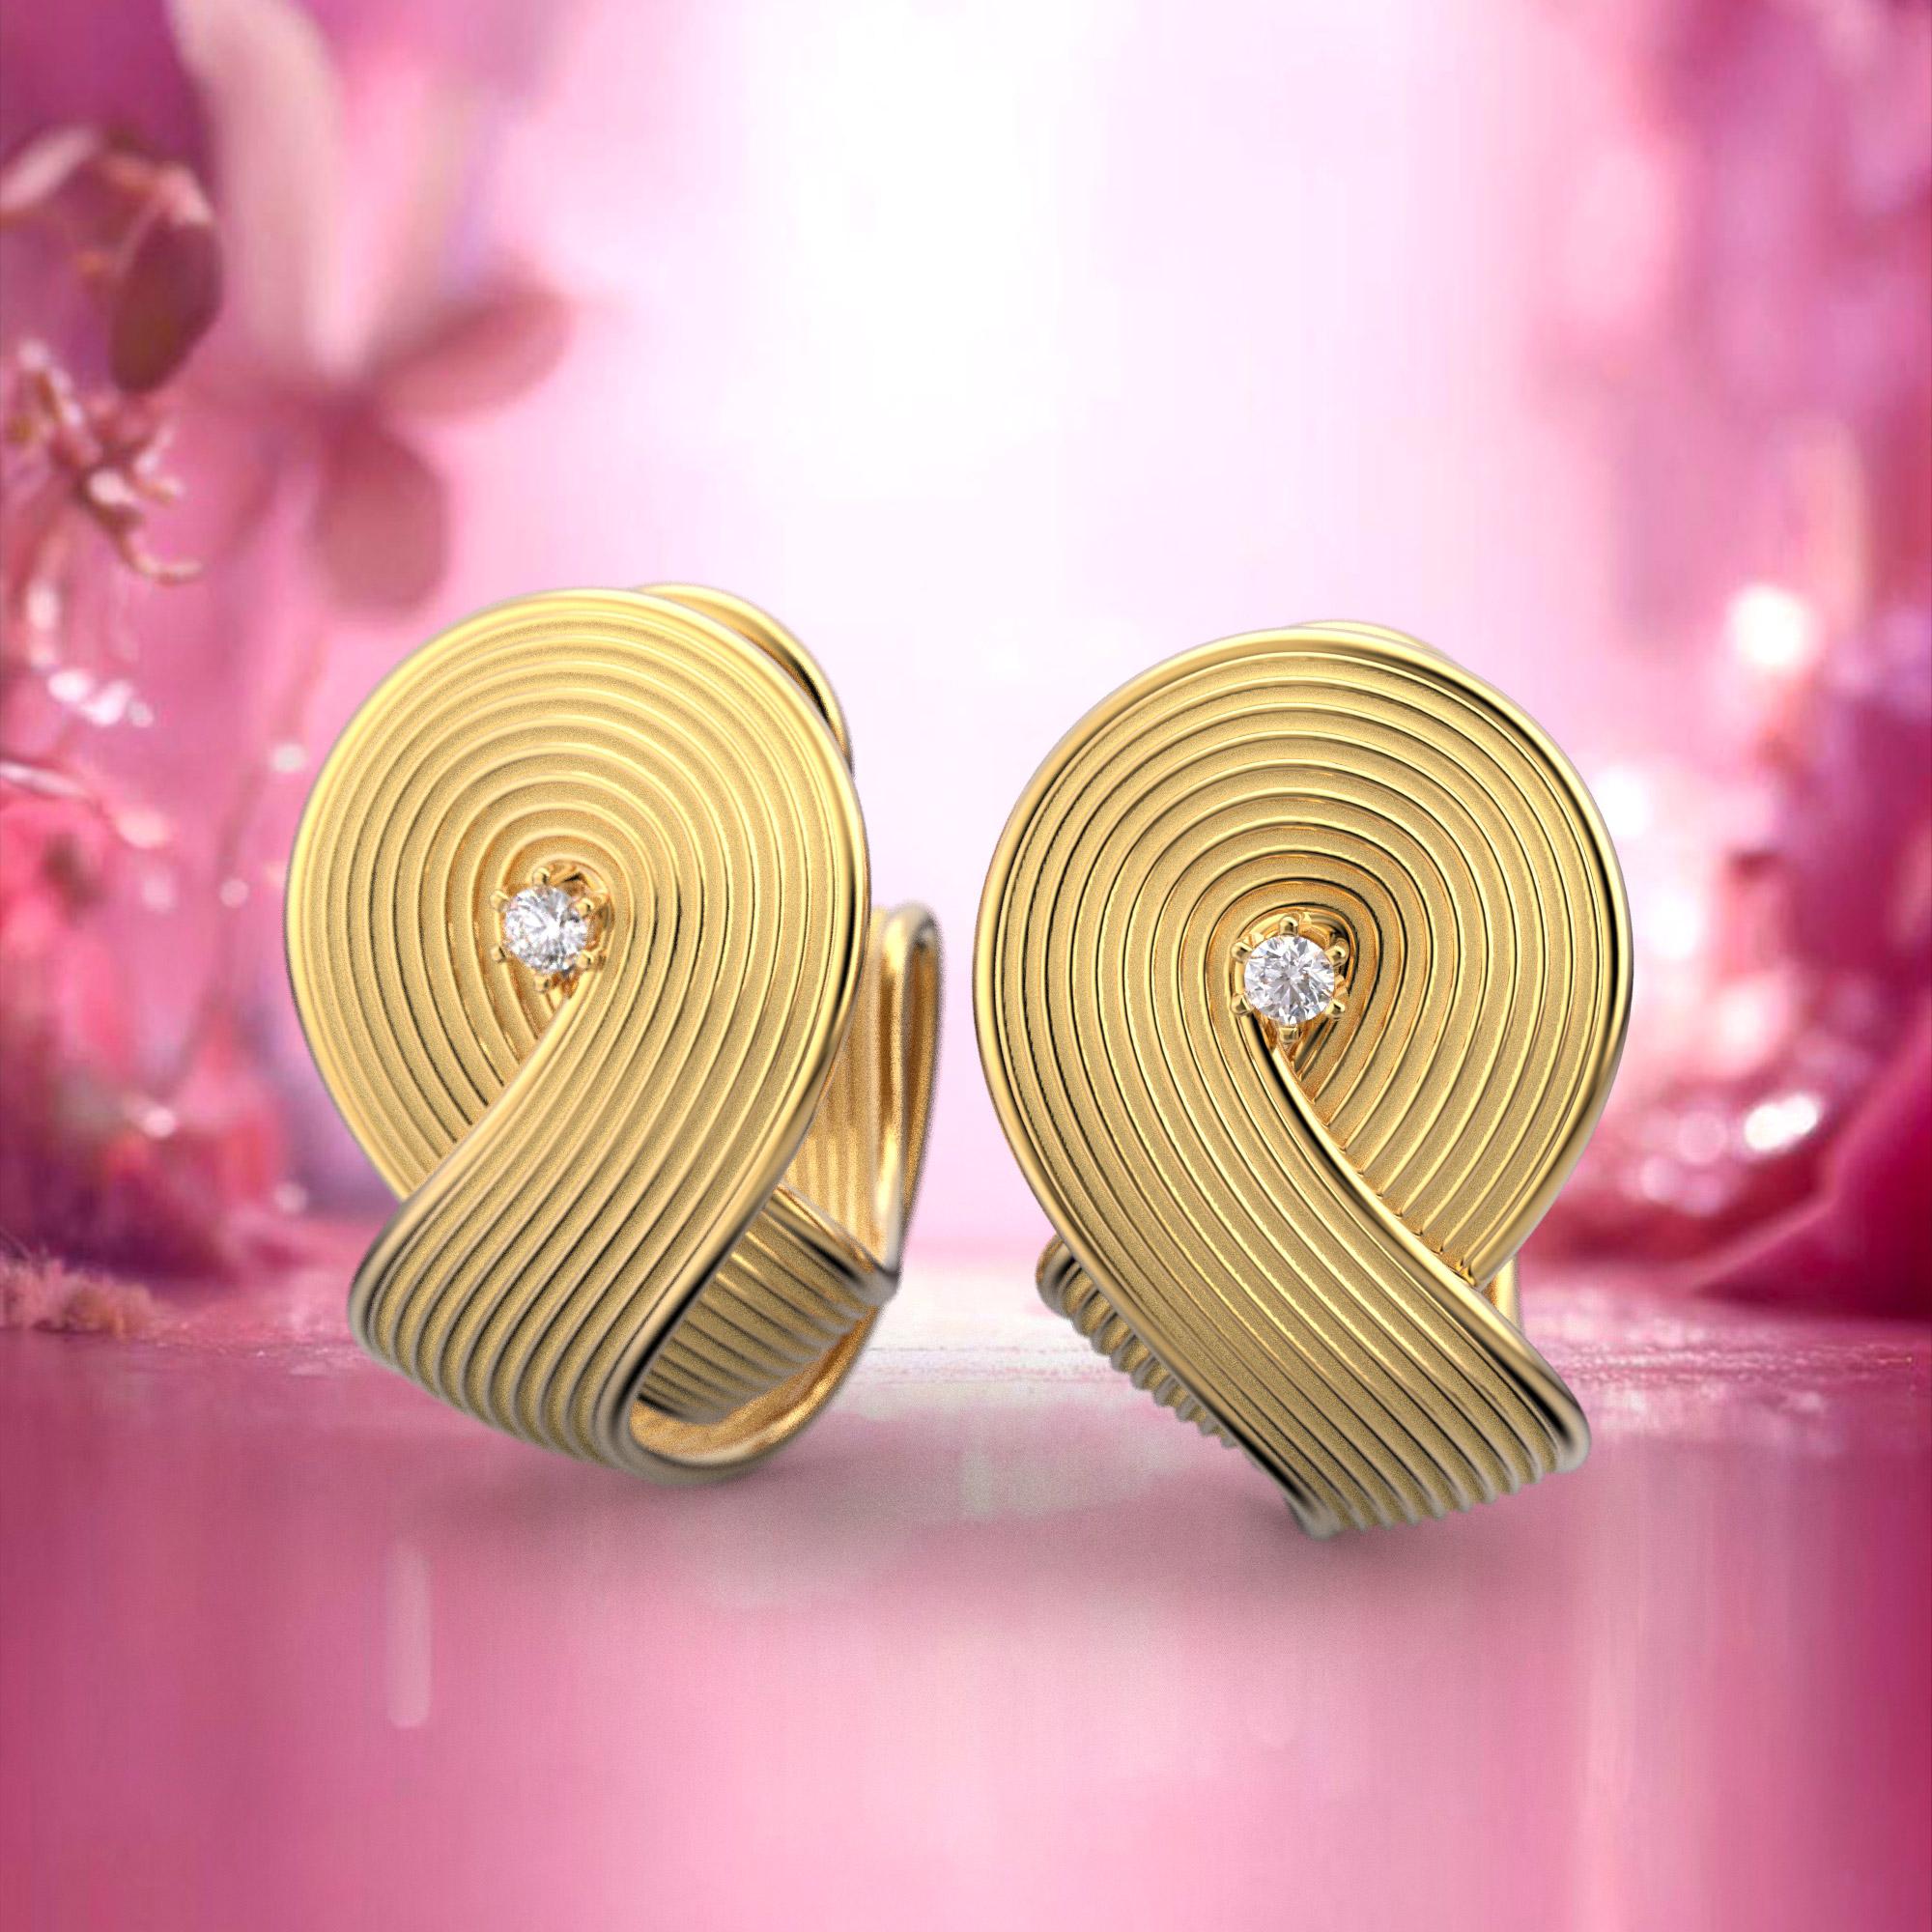 Modern Oltremare Gioielli Statement Earrings in 18k Gold and Diamonds, made in Italy. For Sale